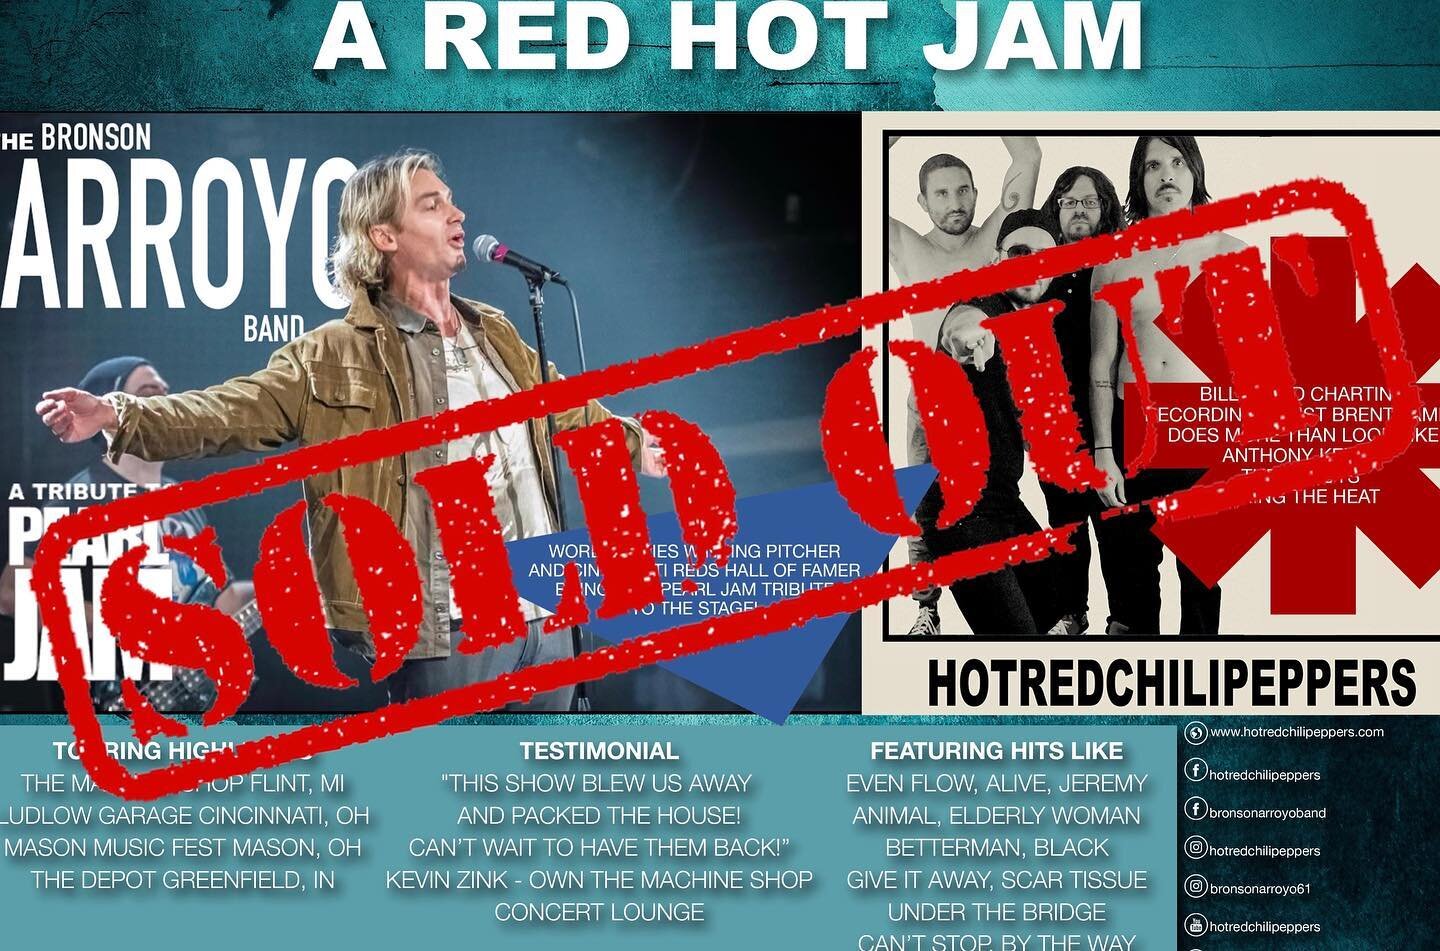 Our show tomorrow night with The Bronson Arroyo Band is completely SOLD OUT! Thank you to everyone who bought tickets for this one. We can&rsquo;t wait to rock with you at Little Miami Brewing Company! 

#thebronsonarroyoband #hotredchilipeppers #tri